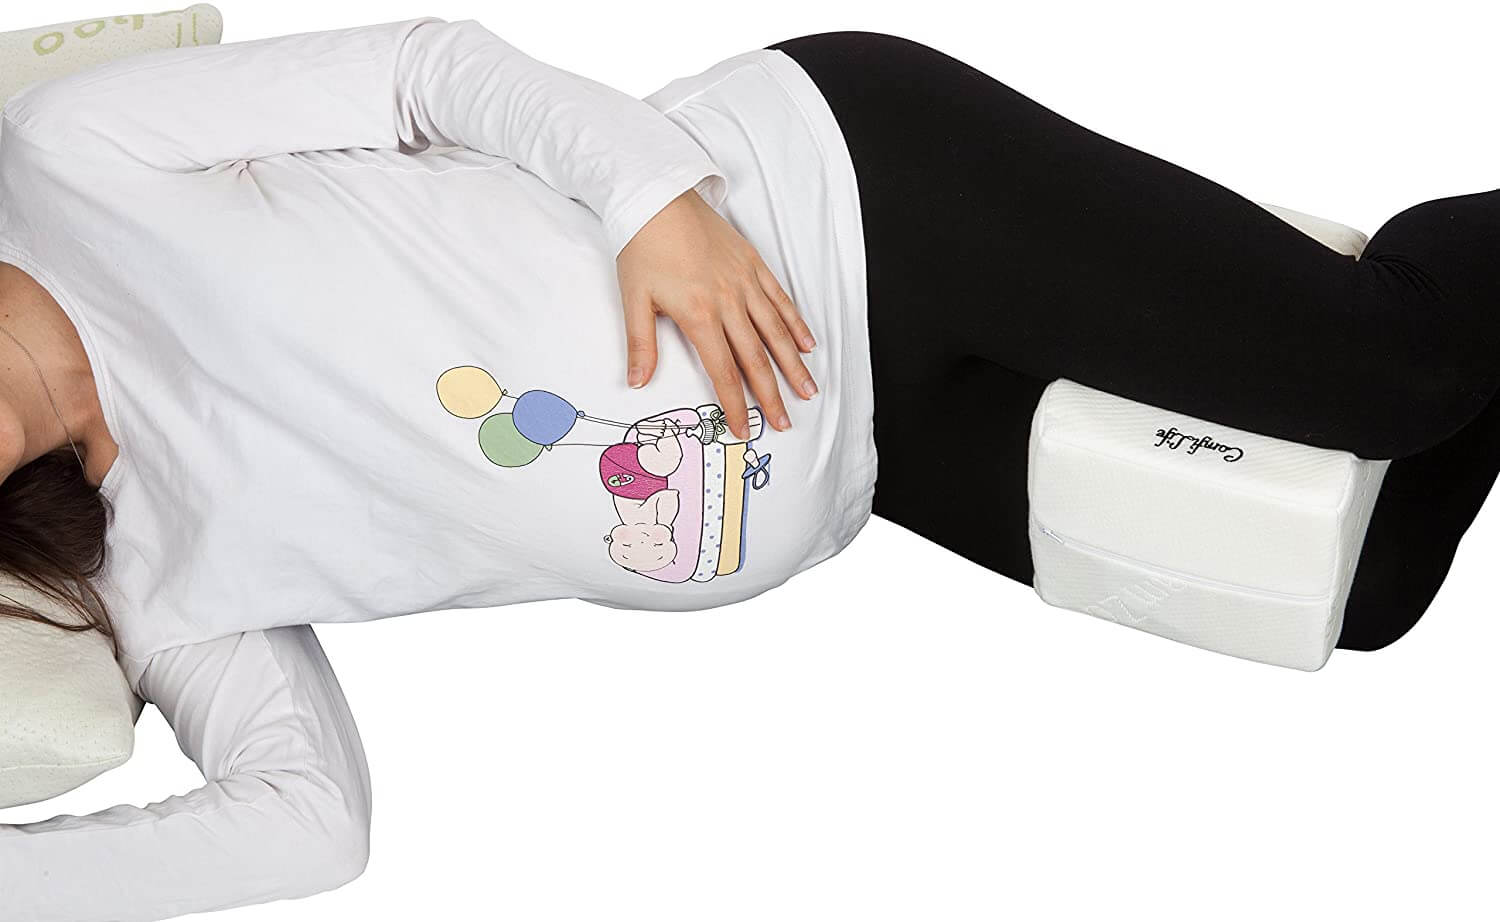 https://comfilife.com/wp-content/uploads/2021/01/ComfiLife-Orthopedic-Knee-Pillow-for-Sciatica-Relief-Back-Pain-Leg-Pain-Pregnancy-Hip-and-Joint-Pain_06.jpg